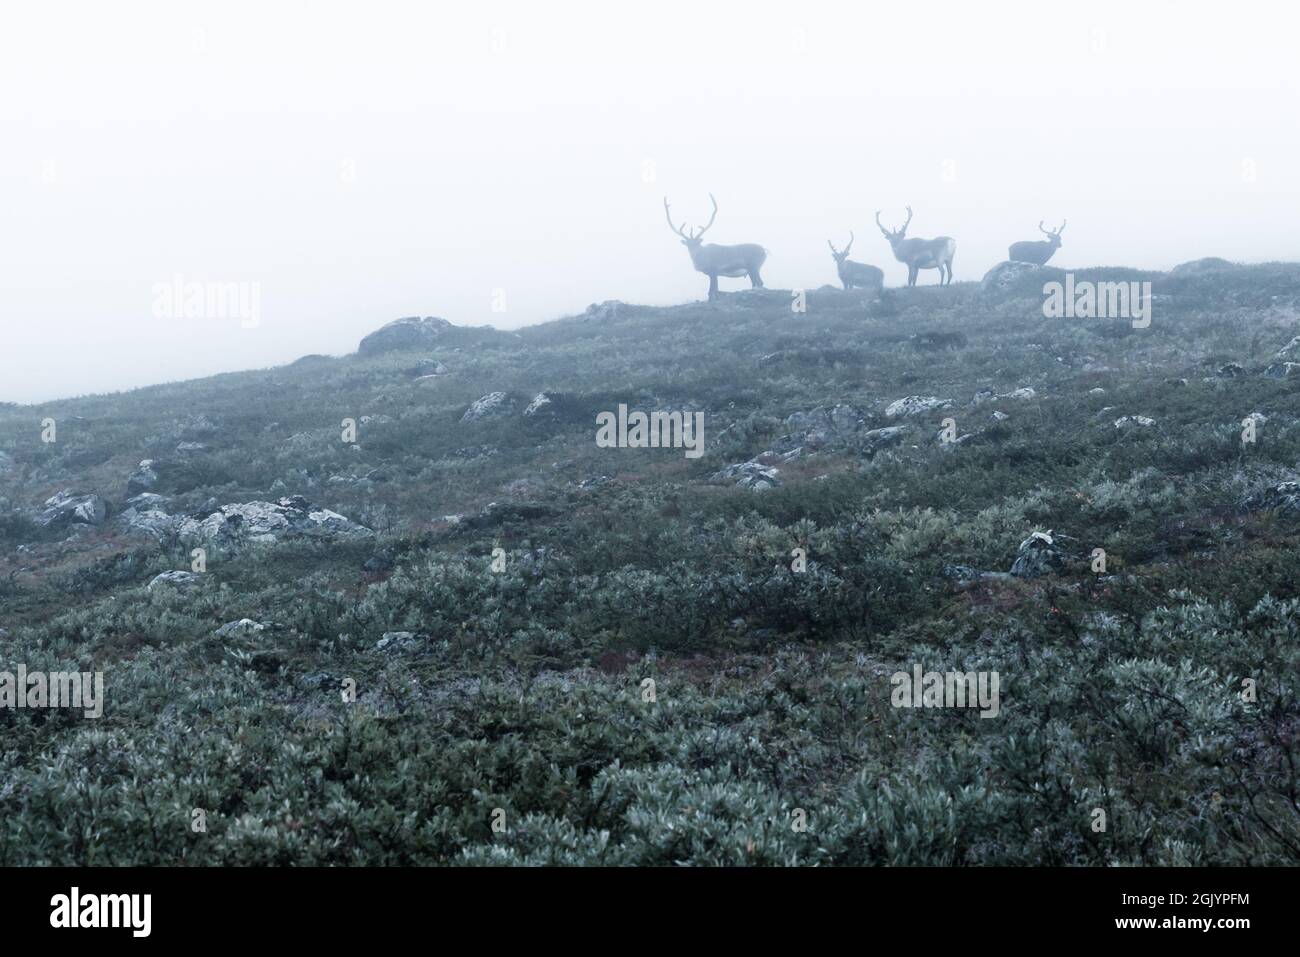 Silhouettes of four reindeers on distatnt horizon on a very misty day in arctic wilderness. Sarek National Park, Sweden. Stock Photo